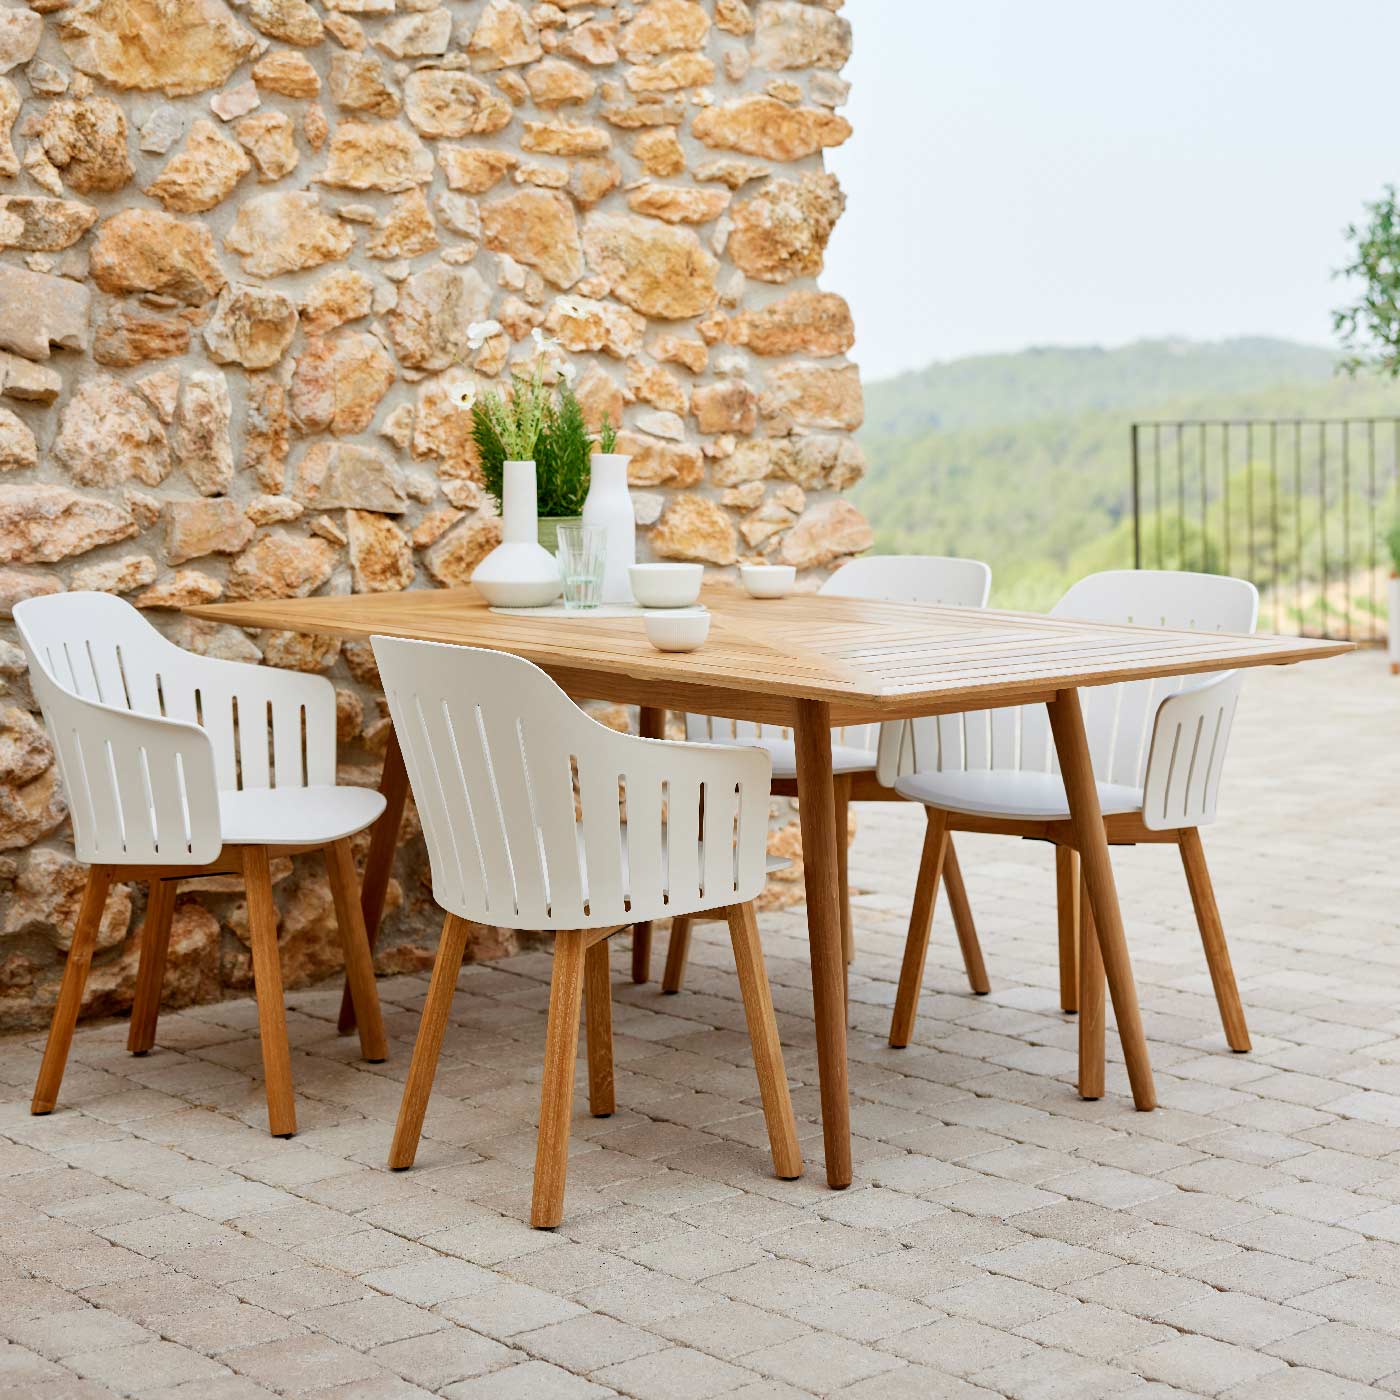 Image of Define rectangular teak table and Choice white recycled garden chairs on rustic terrace